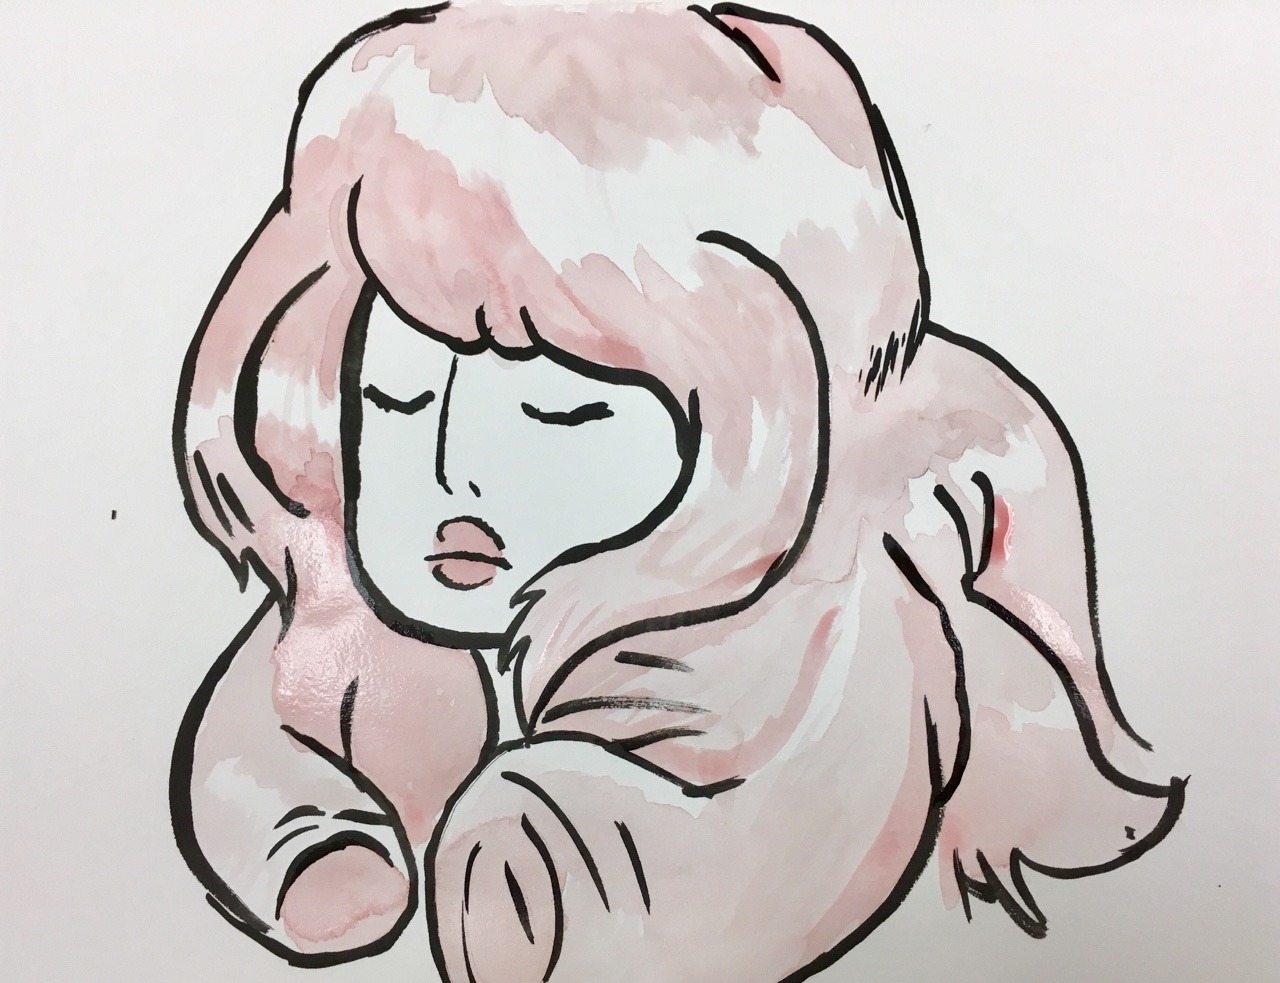 Ink #12 - Rose Quartz from Steven Universe (or is it the other way around?) I got different colored inks for my birthday.